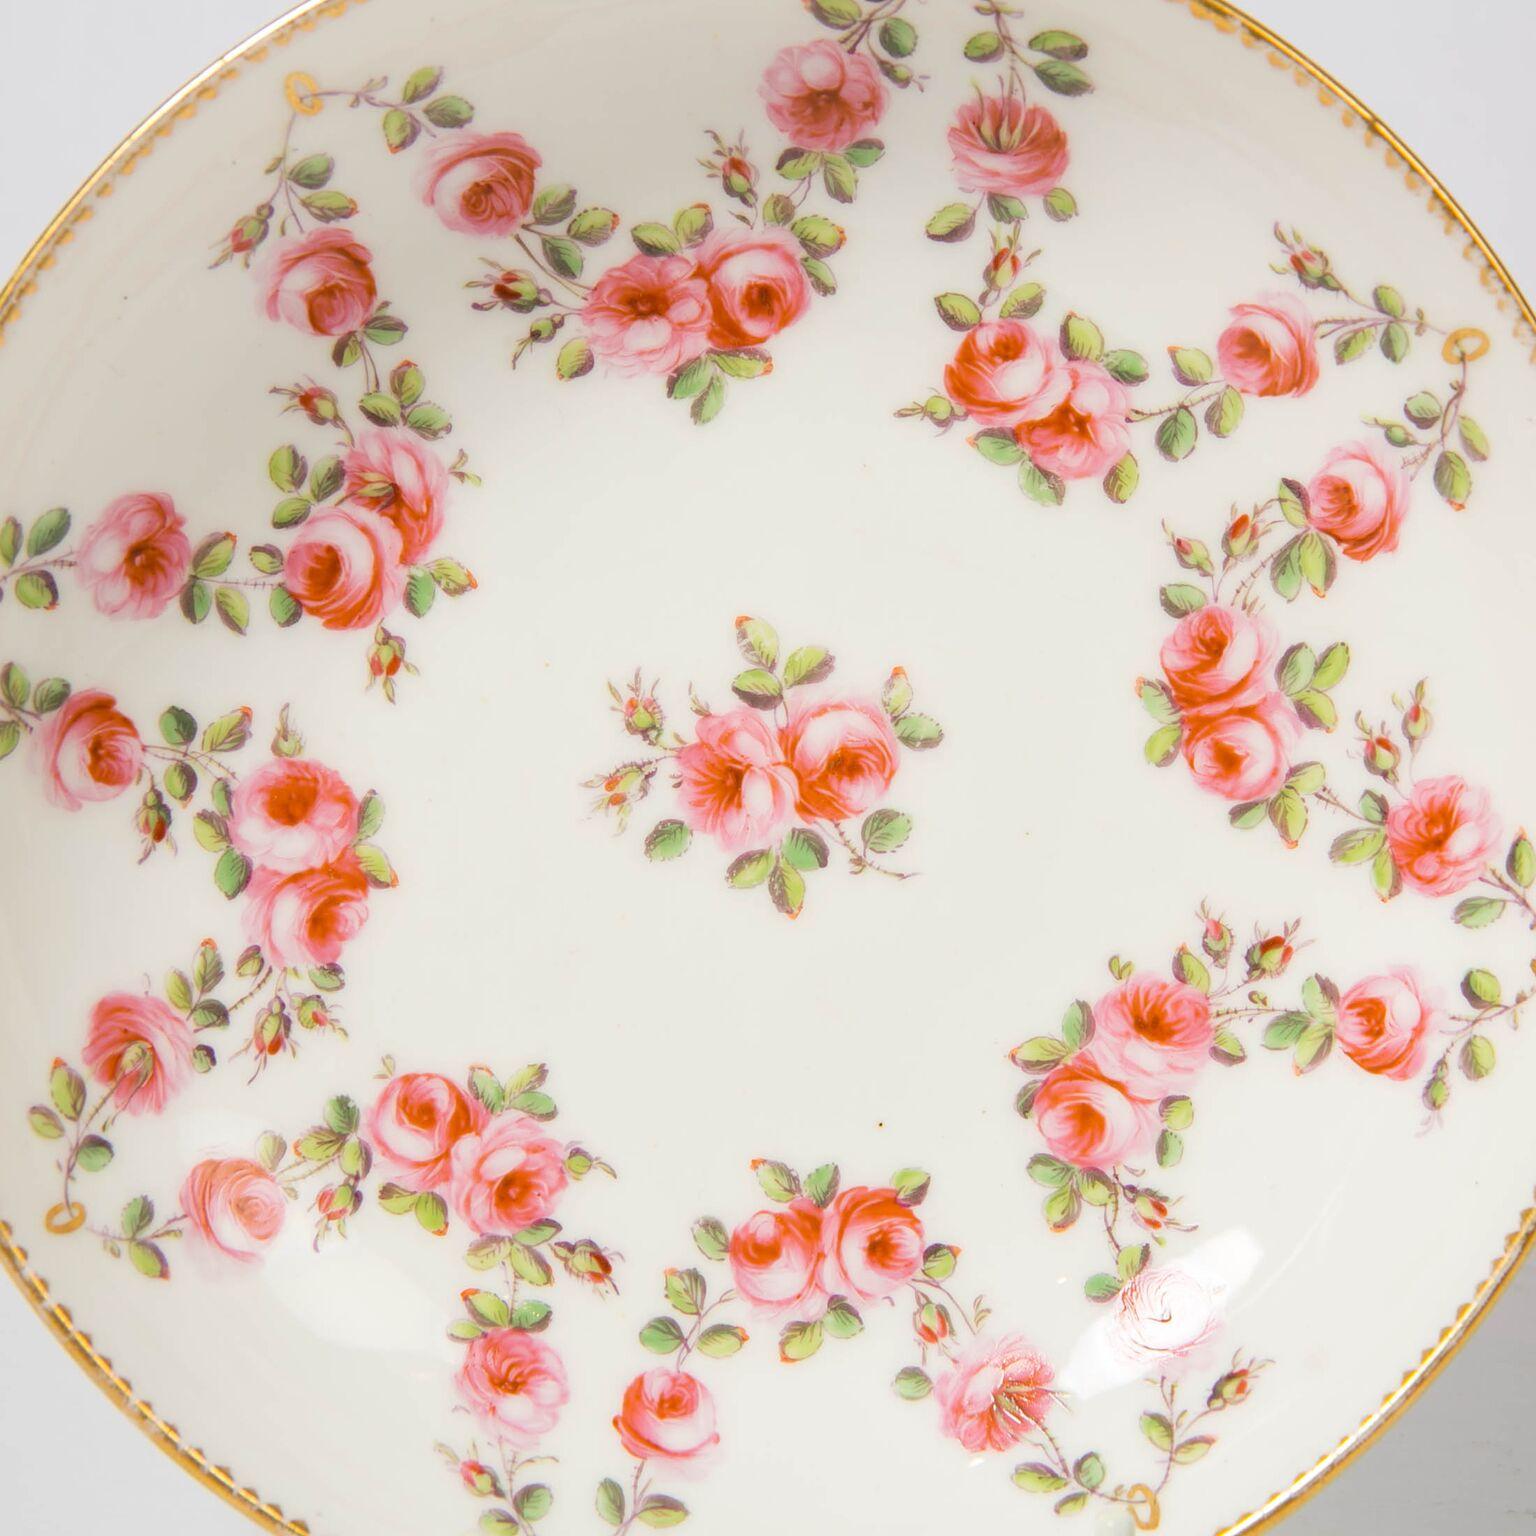 What makes Nantgarw porcelain special?
In the years 1813-1822, some of the most beautiful porcelain in the world was produced at the Nantgarw China Works. Founded in Wales by William Billingsley, who was one of the most remarkable porcelain painters